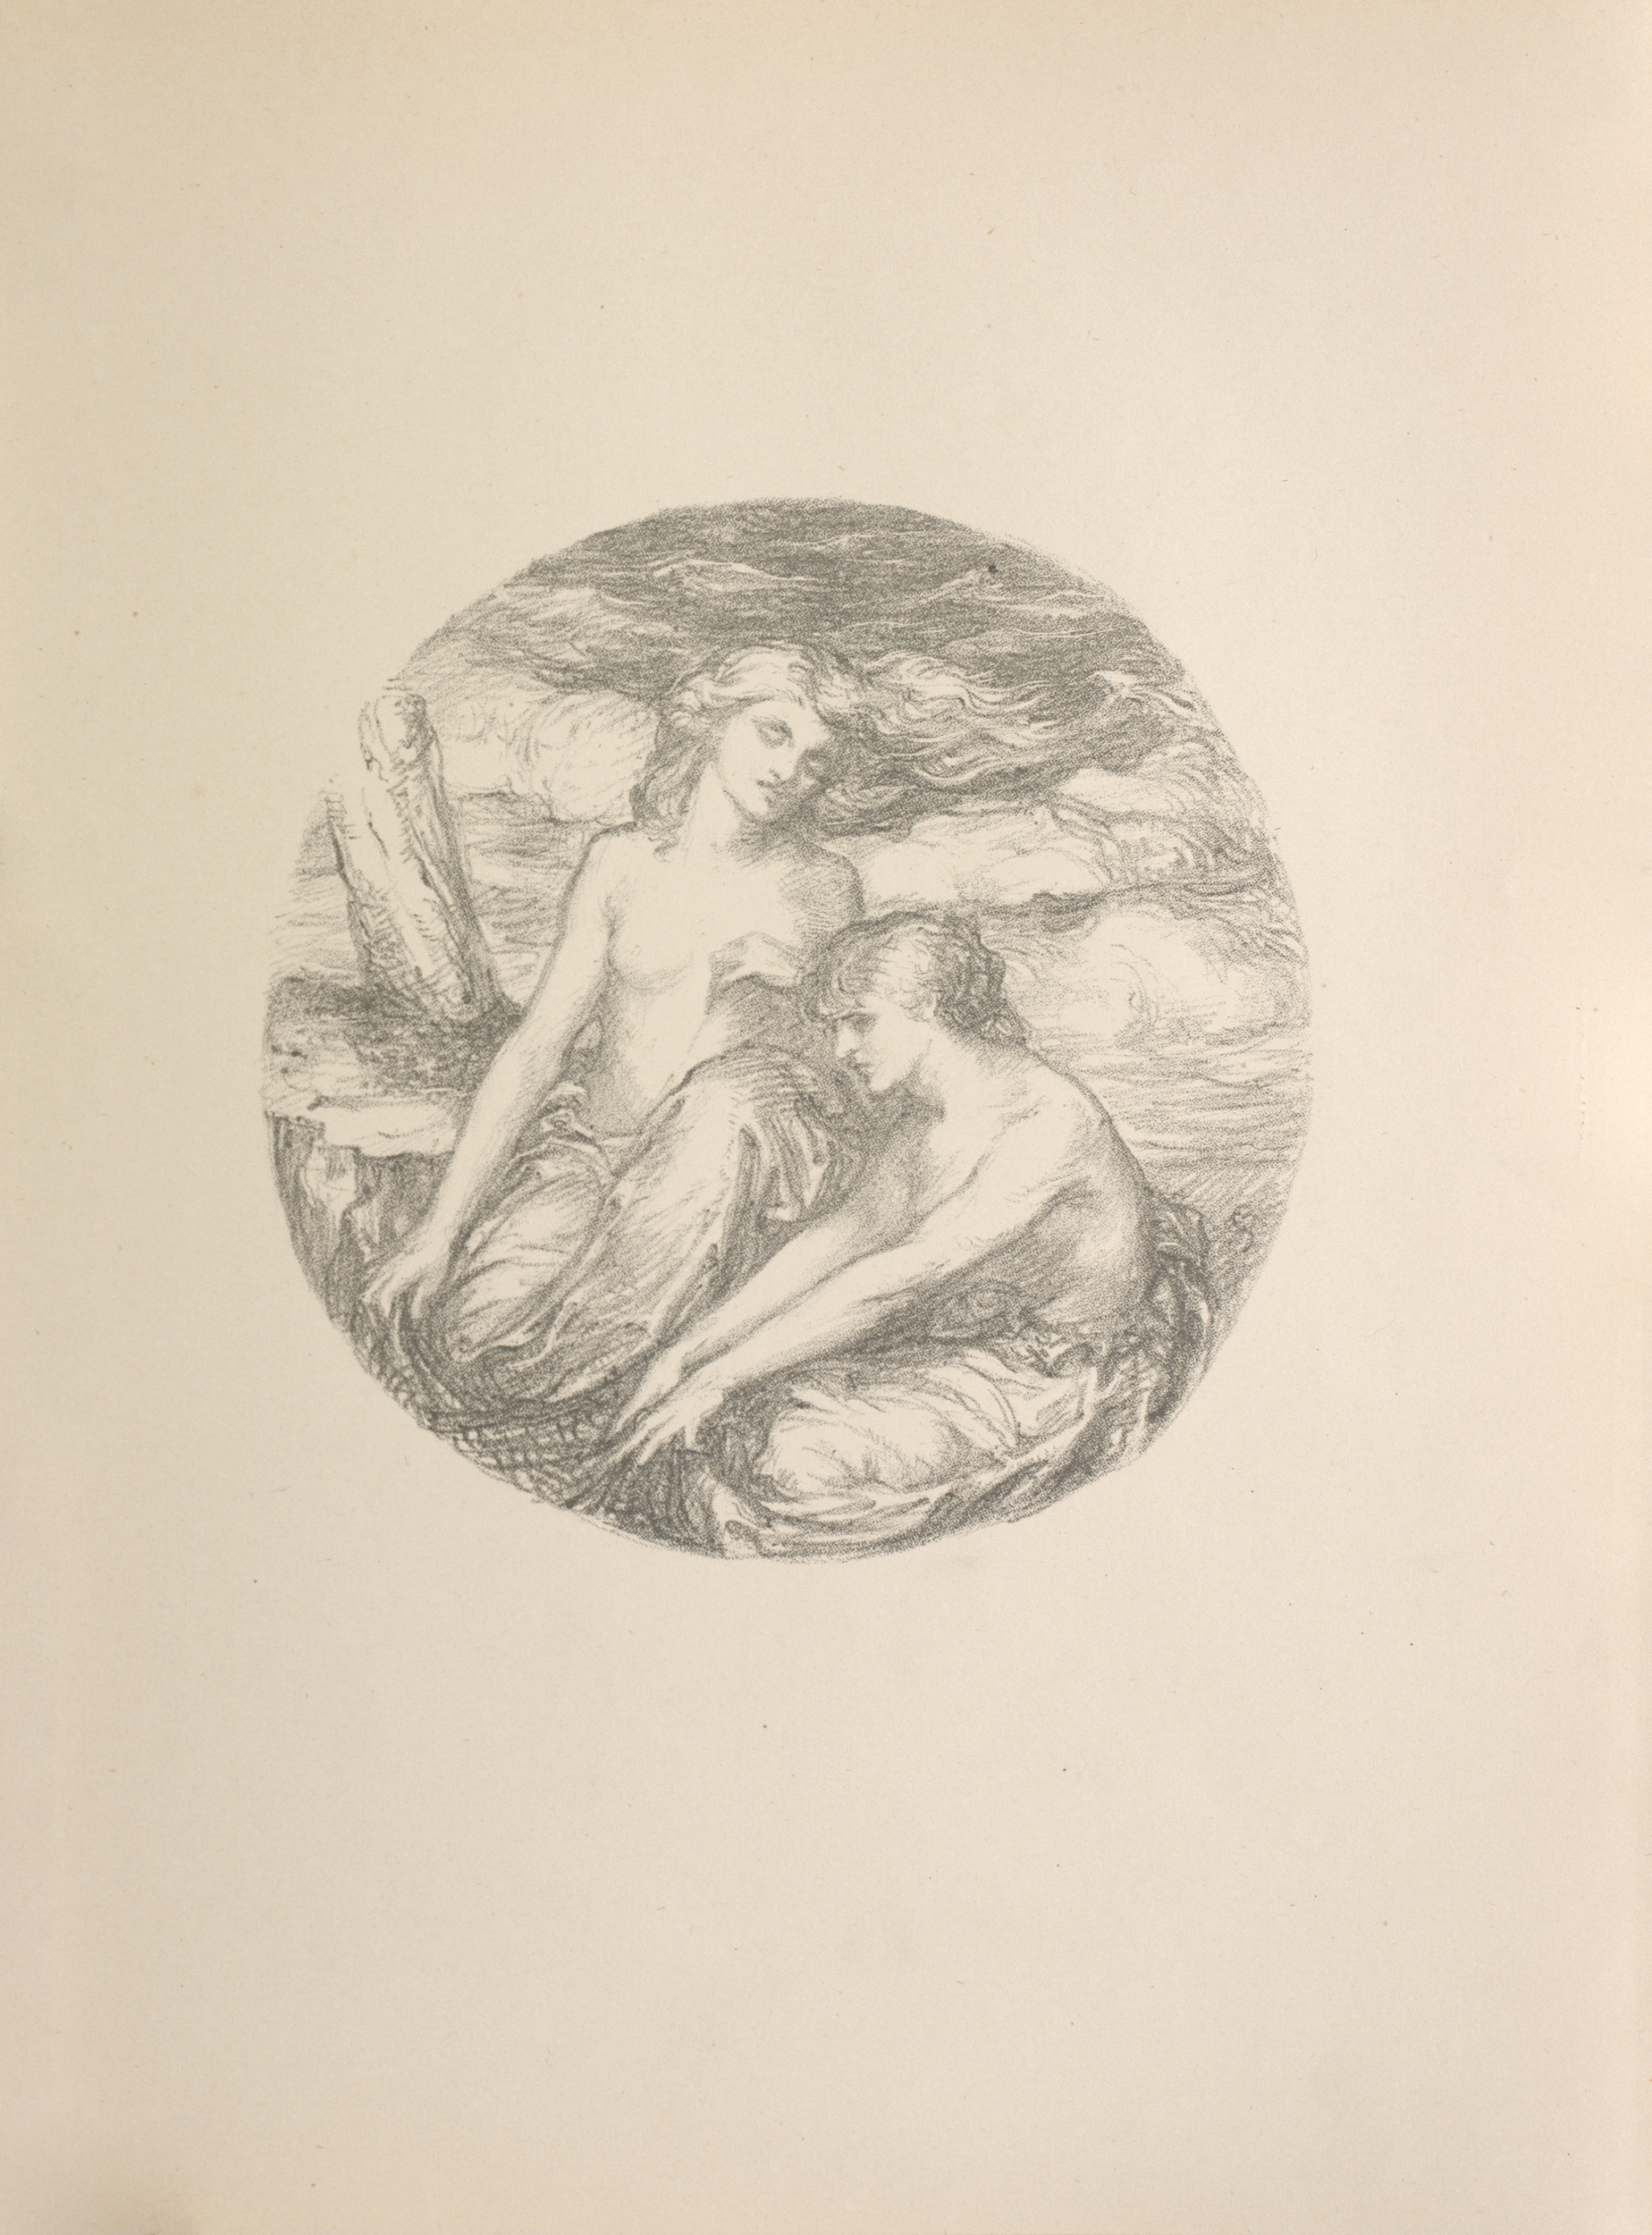 The circular lithograph, printed in soft gray inks, is positioned in the center of the page. It depicts two women sitting near the sea. The woman in the foreground sits on the ground in profile, facing left. Her torso is bare and she is wearing only a piece of light fabric draped around her lower body. Her arms are extended in front of her, and she is holding onto a net that is visible in the bottom left section of the image. The woman behind her is seated upright and is facing forwards, leaning towards the right side of the image. She also is only wearing a piece of light fabric draped around her lower body. Her right hand is extended and holding the net on the left. Her wavy long hair is blowing in the wind and blending into the background of waves and clouds. The two figures appear to be on a cliff side by the sea. The bottom half of a tree is visible in the upper left background of the image.